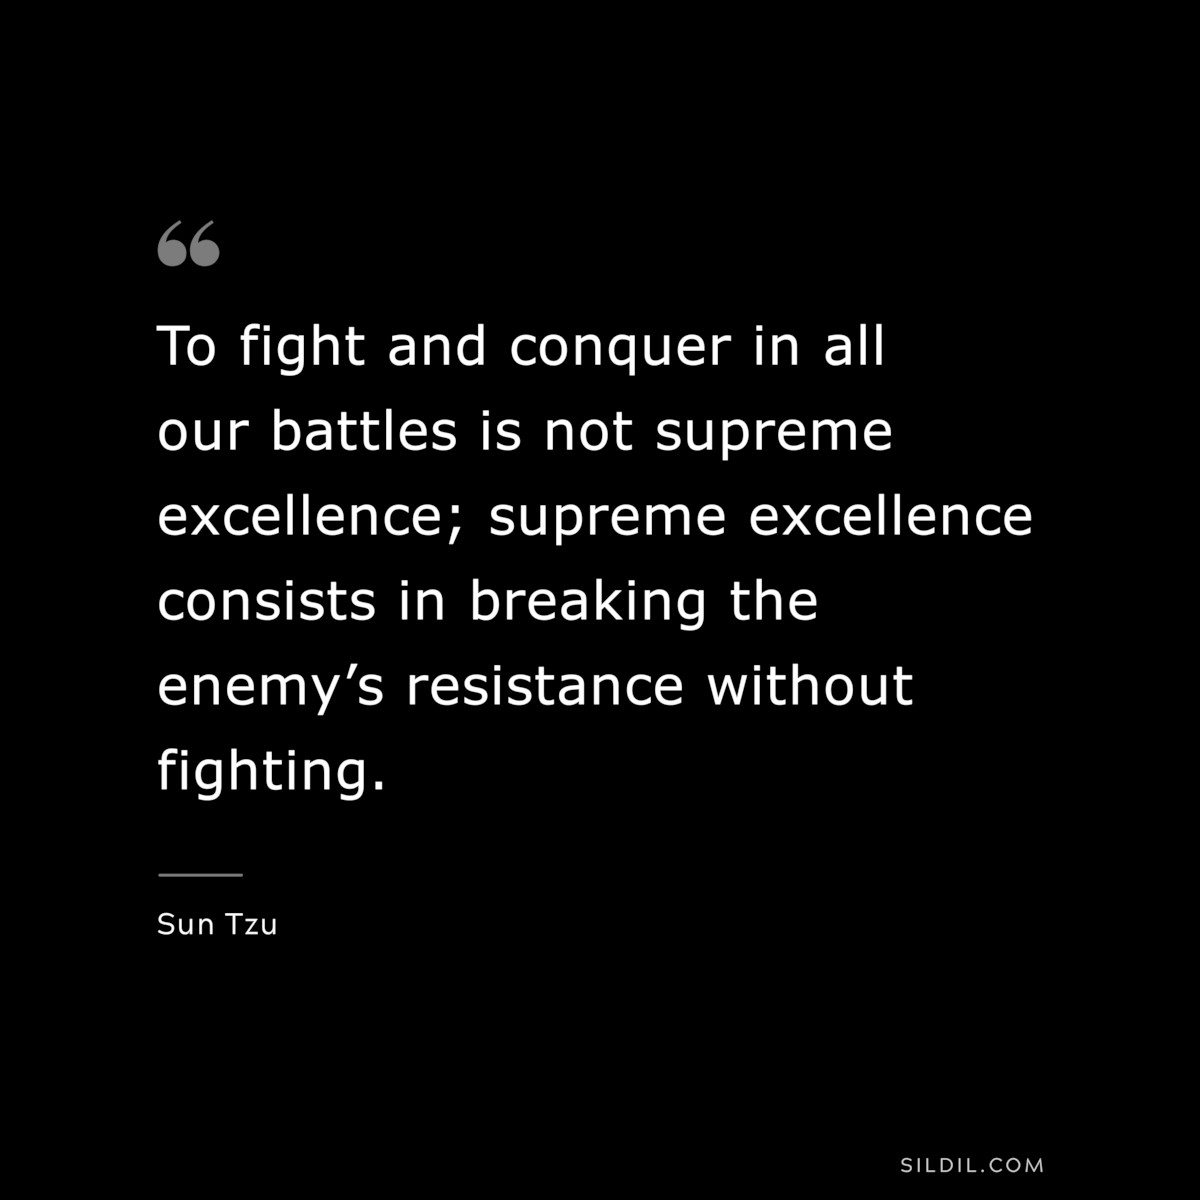 To fight and conquer in all our battles is not supreme excellence; supreme excellence consists in breaking the enemy’s resistance without fighting.― Sun Tzu